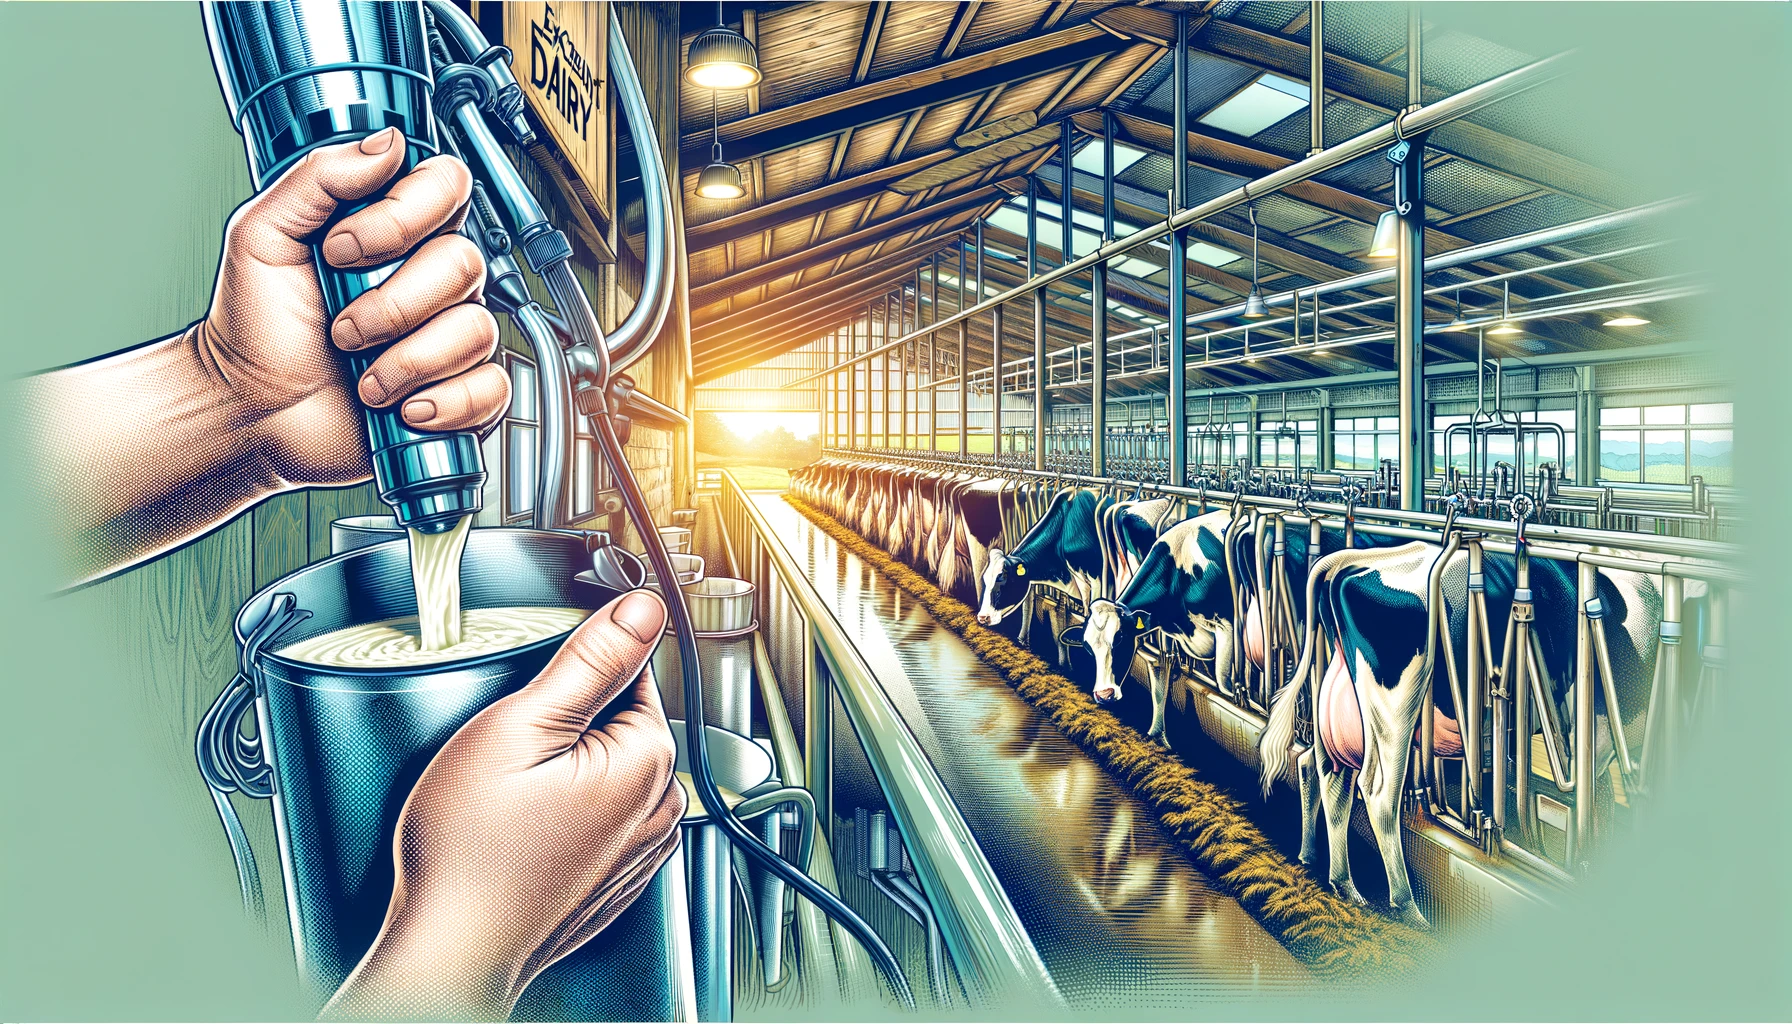 Gives Family Dairy - A vivid and detailed wide illustration of a closeup scene at 'Excellent Dairy' located in the Midwest of the USA. The focus is on a dairy farmer's han